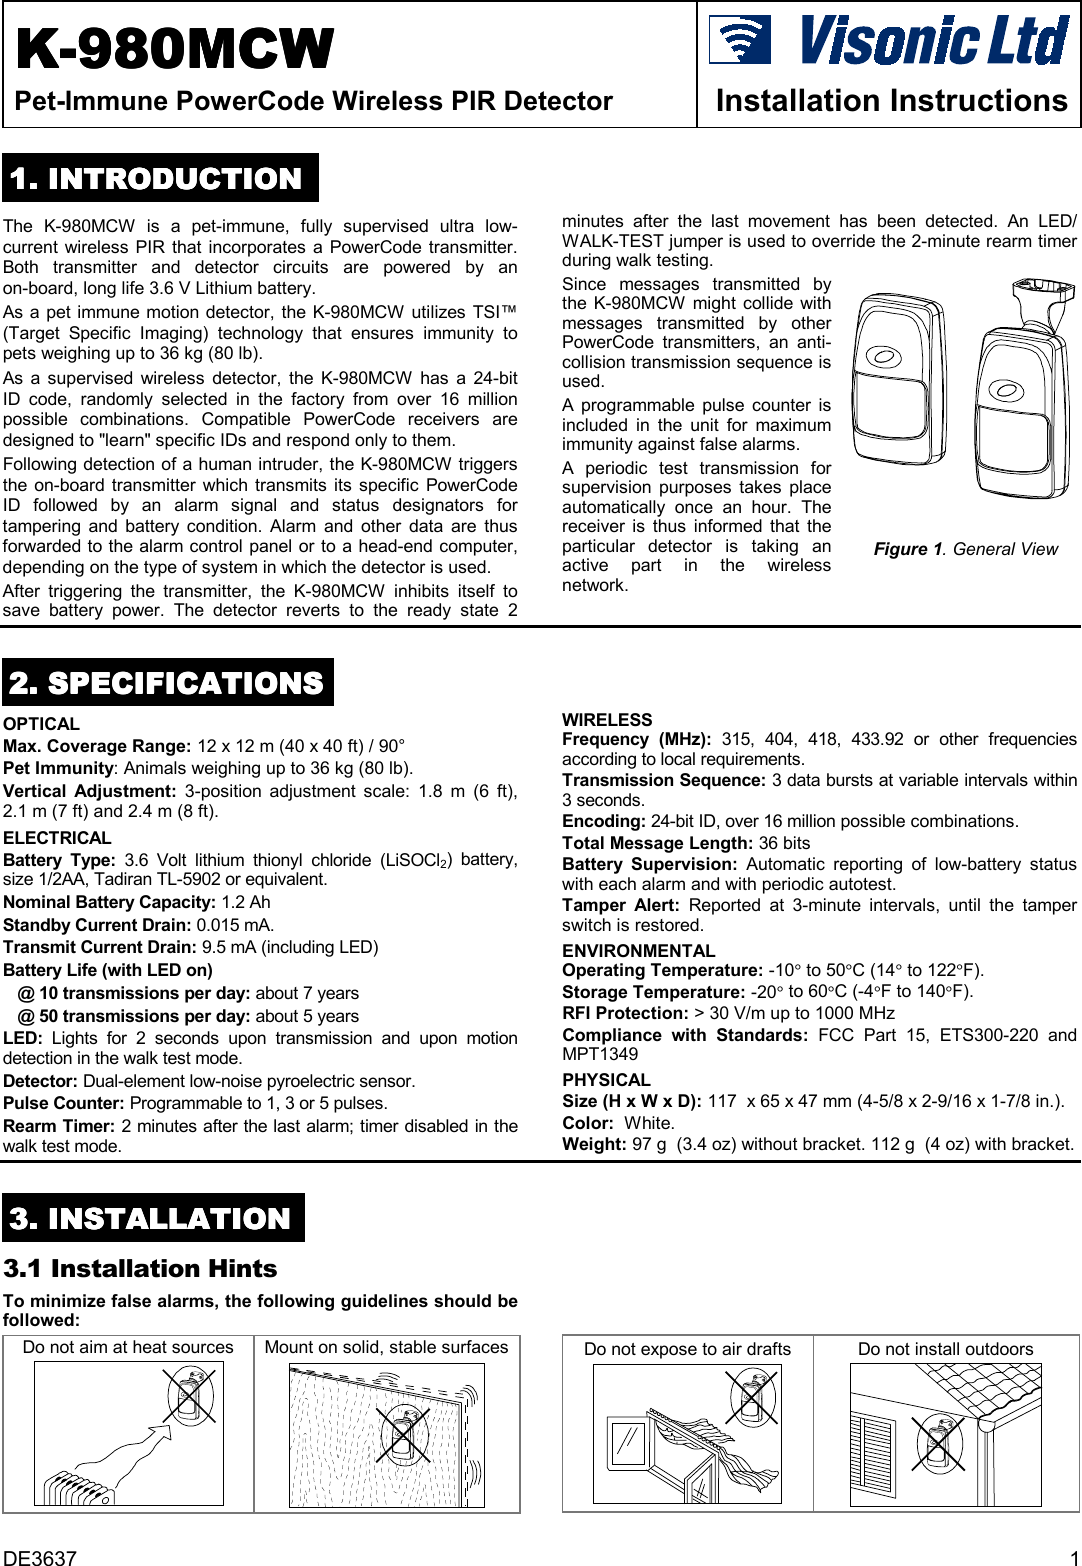 DE3637 1KKKK-980-980-980-980MCWMCWMCWMCWPet-Immune PowerCode Wireless PIR Detector Installation Instructions1111. INTRODUCTION. INTRODUCTION. INTRODUCTION. INTRODUCTIONThe K-980MCW is a pet-immune, fully supervised ultra low-current wireless PIR that incorporates a PowerCode transmitter.Both transmitter and detector circuits are powered by anon-board, long life 3.6 V Lithium battery.As a pet immune motion detector, the K-980MCW utilizes TSI™(Target Specific Imaging) technology that ensures immunity topets weighing up to 36 kg (80 lb).  As a supervised wireless detector, the K-980MCW has a 24-bitID code, randomly selected in the factory from over 16 millionpossible combinations. Compatible PowerCode receivers aredesigned to &quot;learn&quot; specific IDs and respond only to them.Following detection of a human intruder, the K-980MCW triggersthe on-board transmitter which transmits its specific PowerCodeID followed by an alarm signal and status designators fortampering and battery condition. Alarm and other data are thusforwarded to the alarm control panel or to a head-end computer,depending on the type of system in which the detector is used.After triggering the transmitter, the K-980MCW inhibits itself tosave battery power. The detector reverts to the ready state 2minutes after the last movement has been detected. An LED/WALK-TEST jumper is used to override the 2-minute rearm timerduring walk testing.Since messages transmitted bythe K-980MCW might collide withmessages transmitted by otherPowerCode transmitters, an anti-collision transmission sequence isused.A programmable pulse counter isincluded in the unit for maximumimmunity against false alarms.A periodic test transmission forsupervision purposes takes placeautomatically once an hour. Thereceiver is thus informed that theparticular detector is taking anactive part in the wirelessnetwork.Figure 1. General View2222. SPECIFICATIONS. SPECIFICATIONS. SPECIFICATIONS. SPECIFICATIONSOPTICAL  Max. Coverage Range: 12 x 12 m (40 x 40 ft) / 90°Pet Immunity: Animals weighing up to 36 kg (80 lb).Vertical Adjustment: 3-position adjustment scale: 1.8 m (6 ft),2.1 m (7 ft) and 2.4 m (8 ft).ELECTRICALBattery Type: 3.6 Volt lithium thionyl chloride (LiSOCl2) battery,size 1/2AA, Tadiran TL-5902 or equivalent.Nominal Battery Capacity: 1.2 AhStandby Current Drain: 0.015 mA.Transmit Current Drain: 9.5 mA (including LED)Battery Life (with LED on)@ 10 transmissions per day: about 7 years@ 50 transmissions per day: about 5 yearsLED:  Lights for 2 seconds upon transmission and upon motiondetection in the walk test mode.Detector: Dual-element low-noise pyroelectric sensor.Pulse Counter: Programmable to 1, 3 or 5 pulses.Rearm Timer: 2 minutes after the last alarm; timer disabled in thewalk test mode.WIRELESSFrequency (MHz): 315, 404, 418, 433.92 or other frequenciesaccording to local requirements.Transmission Sequence: 3 data bursts at variable intervals within3 seconds.Encoding: 24-bit ID, over 16 million possible combinations.Total Message Length: 36 bitsBattery Supervision: Automatic reporting of low-battery statuswith each alarm and with periodic autotest.Tamper Alert: Reported at 3-minute intervals, until the tamperswitch is restored.ENVIRONMENTALOperating Temperature: -10° to 50°C (14° to 122°F).Storage Temperature: -20° to 60°C (-4°F to 140°F).RFI Protection: &gt; 30 V/m up to 1000 MHzCompliance with Standards: FCC Part 15, ETS300-220 andMPT1349PHYSICALSize (H x W x D): 117  x 65 x 47 mm (4-5/8 x 2-9/16 x 1-7/8 in.).Color:  White.Weight: 97 g  (3.4 oz) without bracket. 112 g  (4 oz) with bracket.3333. INSTALLATION. INSTALLATION. INSTALLATION. INSTALLATION3.1 Installation HintsTo minimize false alarms, the following guidelines should befollowed:Do not aim at heat sources Mount on solid, stable surfaces Do not expose to air drafts Do not install outdoors